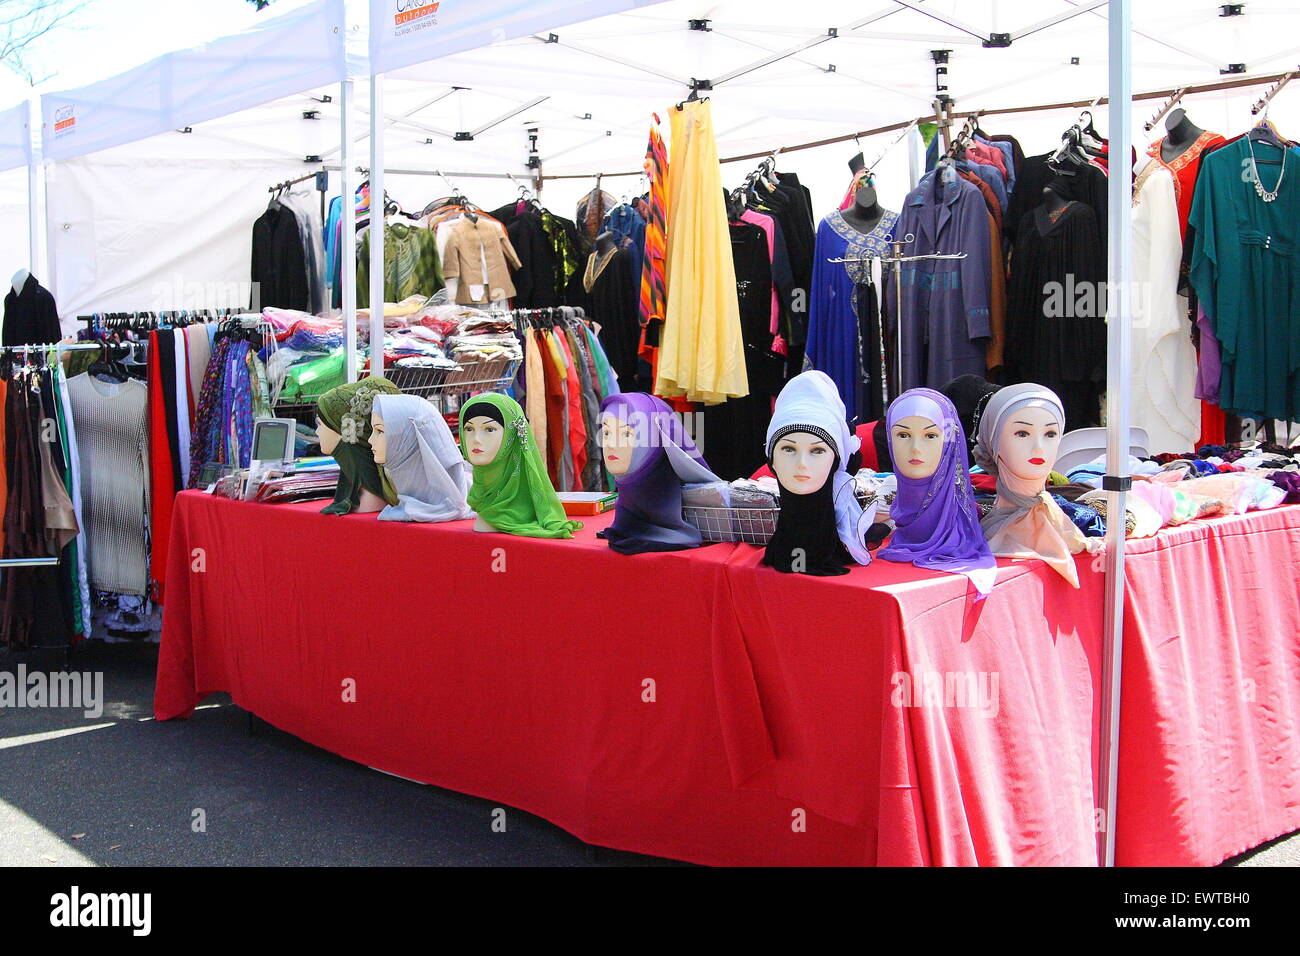 Market stall selling Muslim women outfits during Eid festival in Dandenong Melbourne Australia Stock Photo